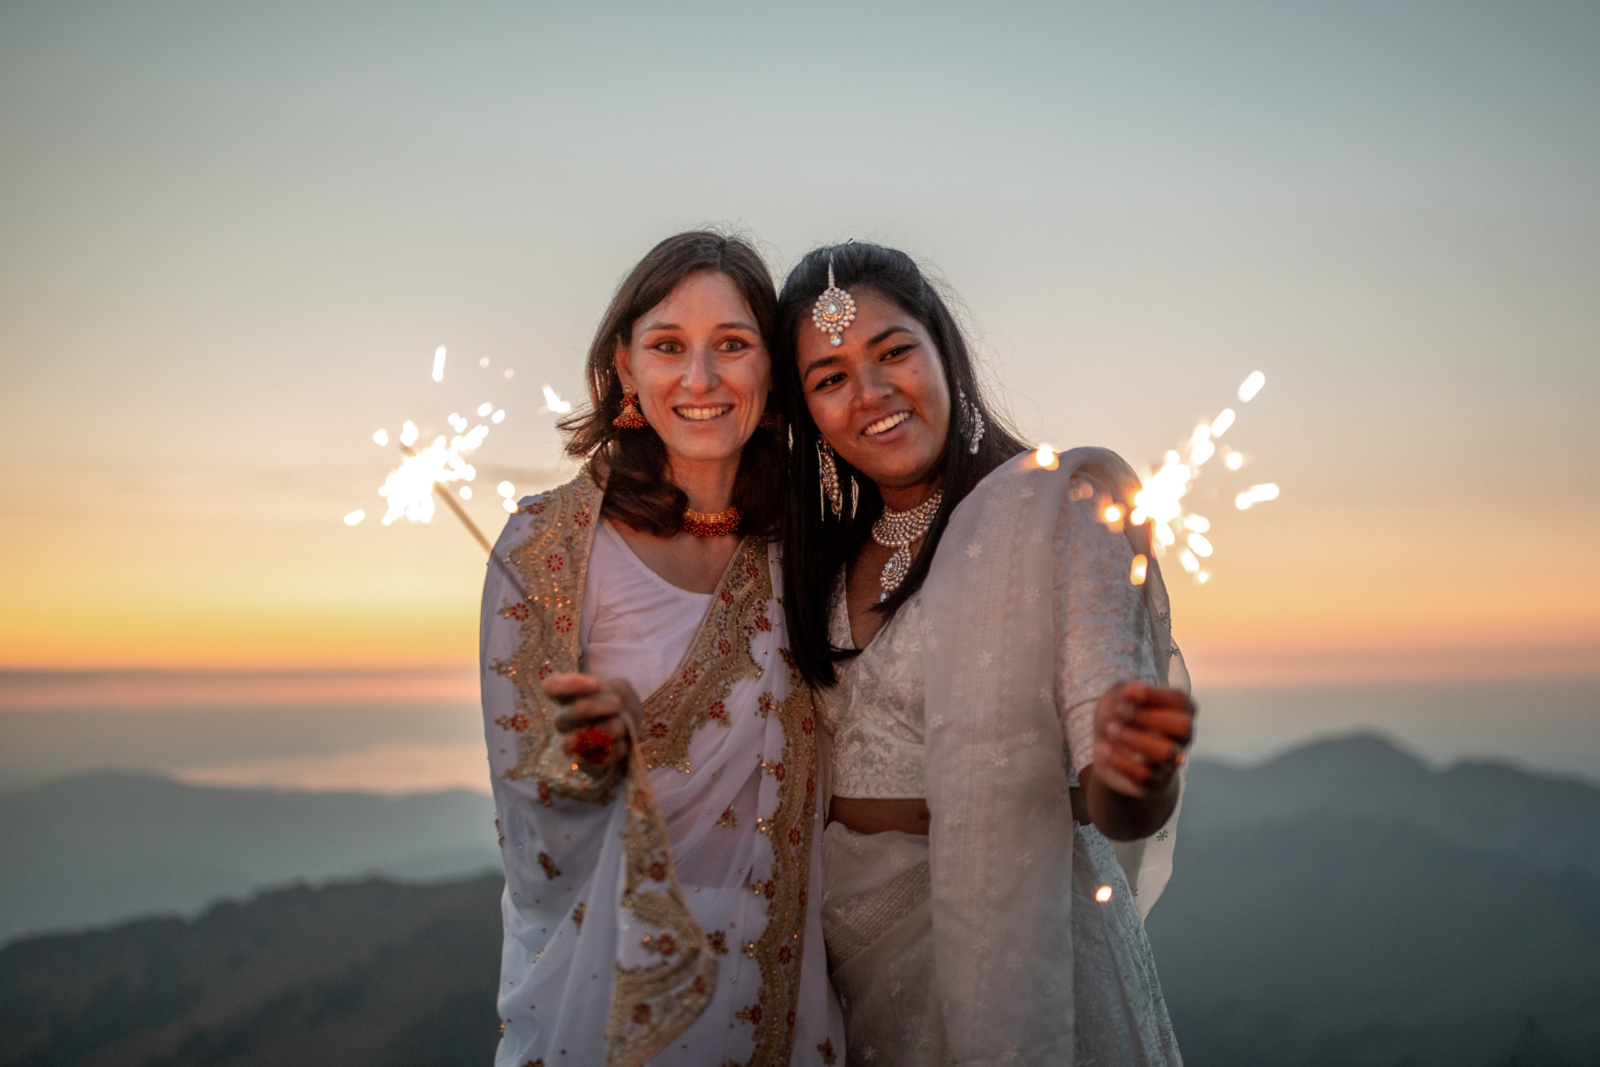 wedding photos with sparklers in the mountains